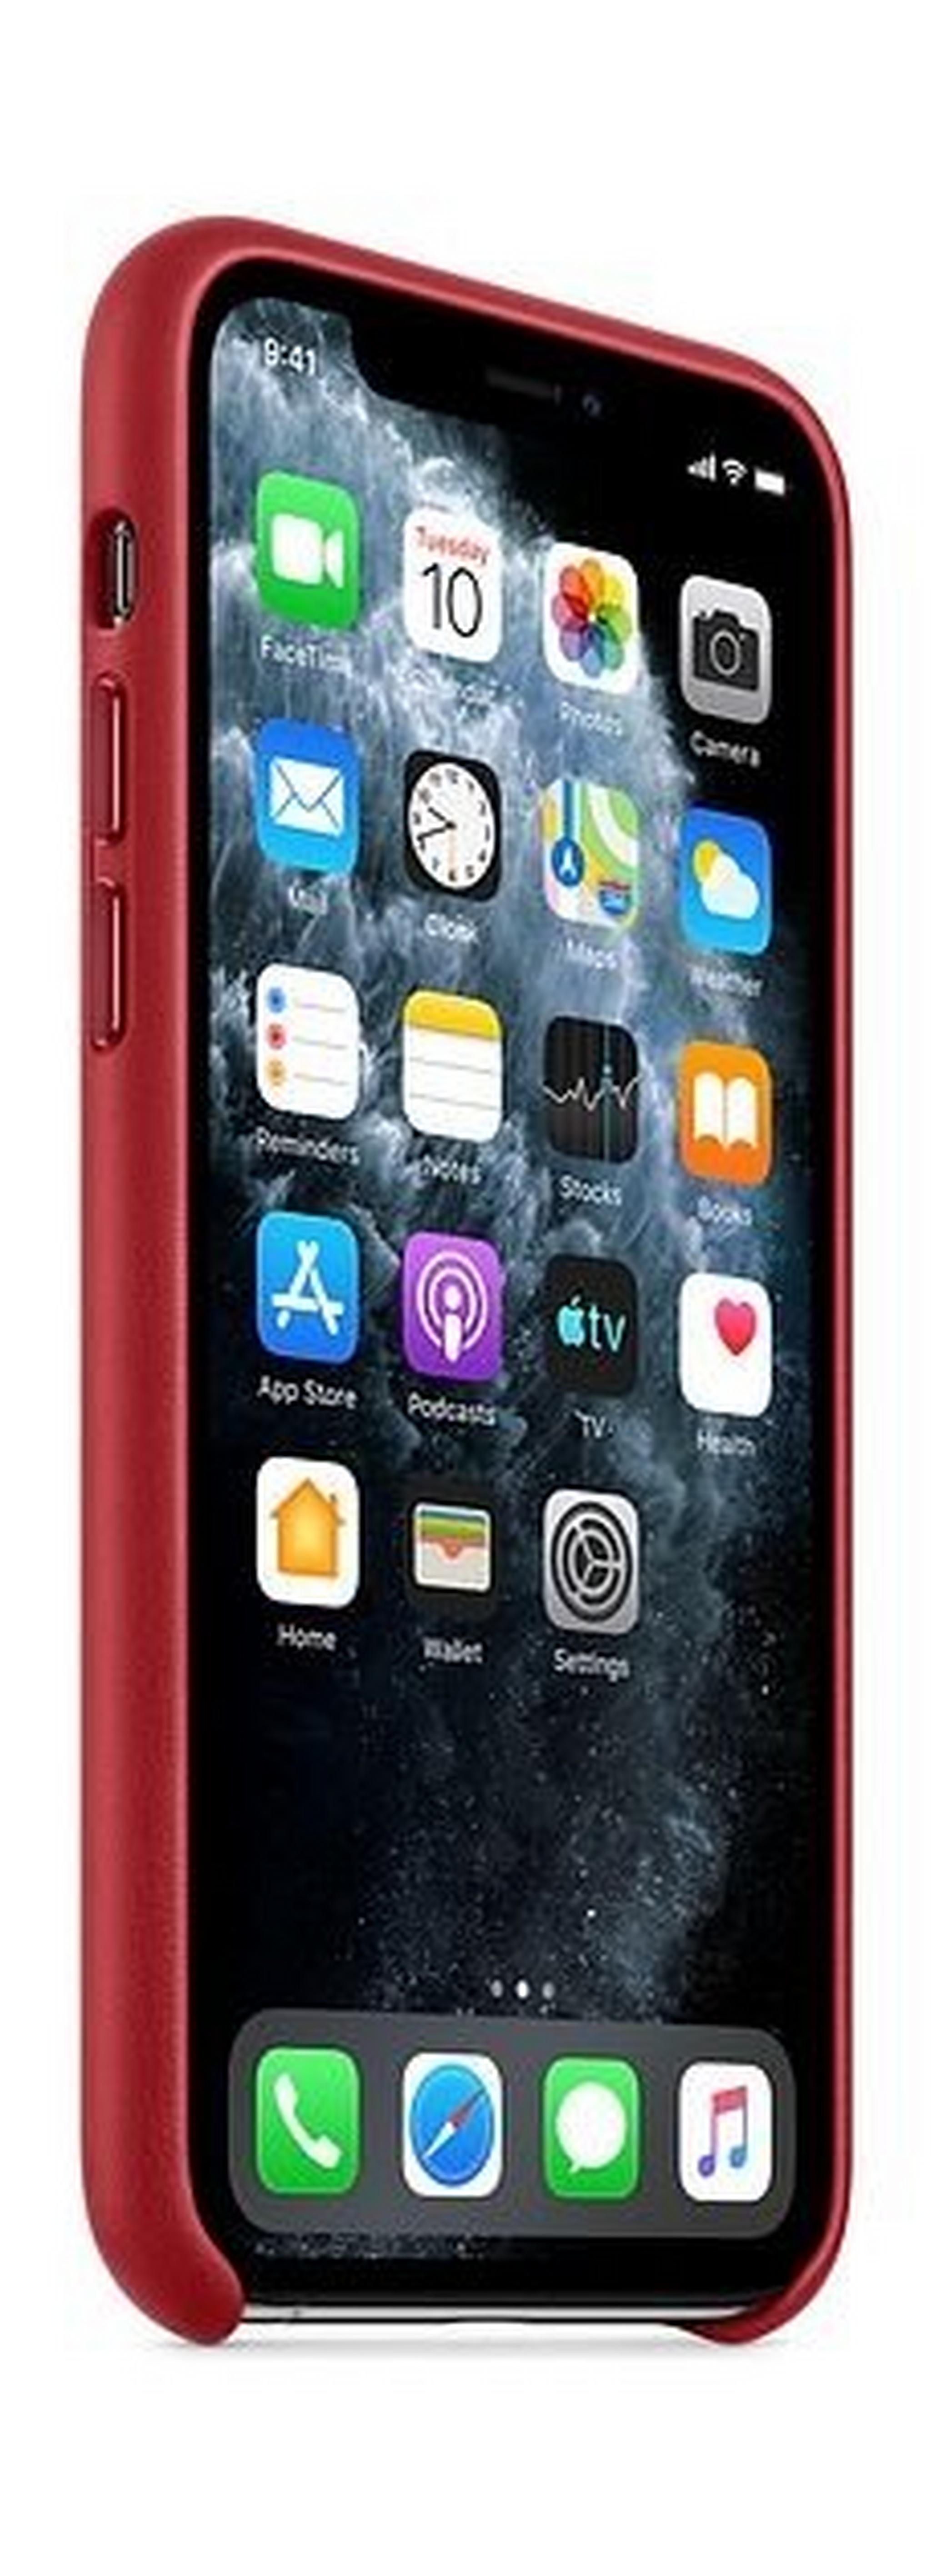 Apple iPhone 11 Pro Leather Case - Red